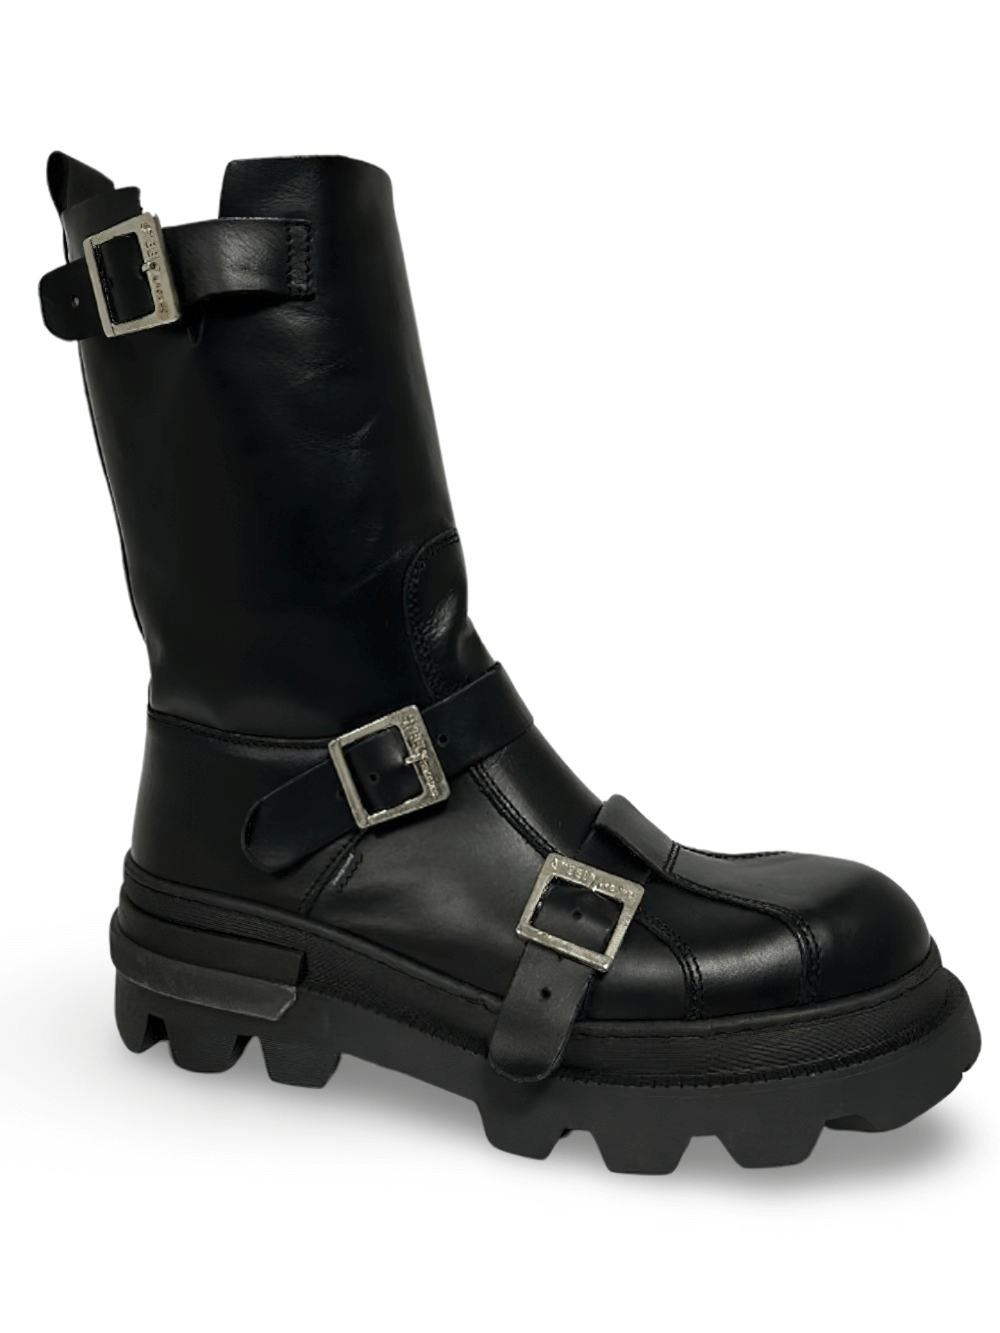 Unisex Grained Leather Ranger Boots With Buckles